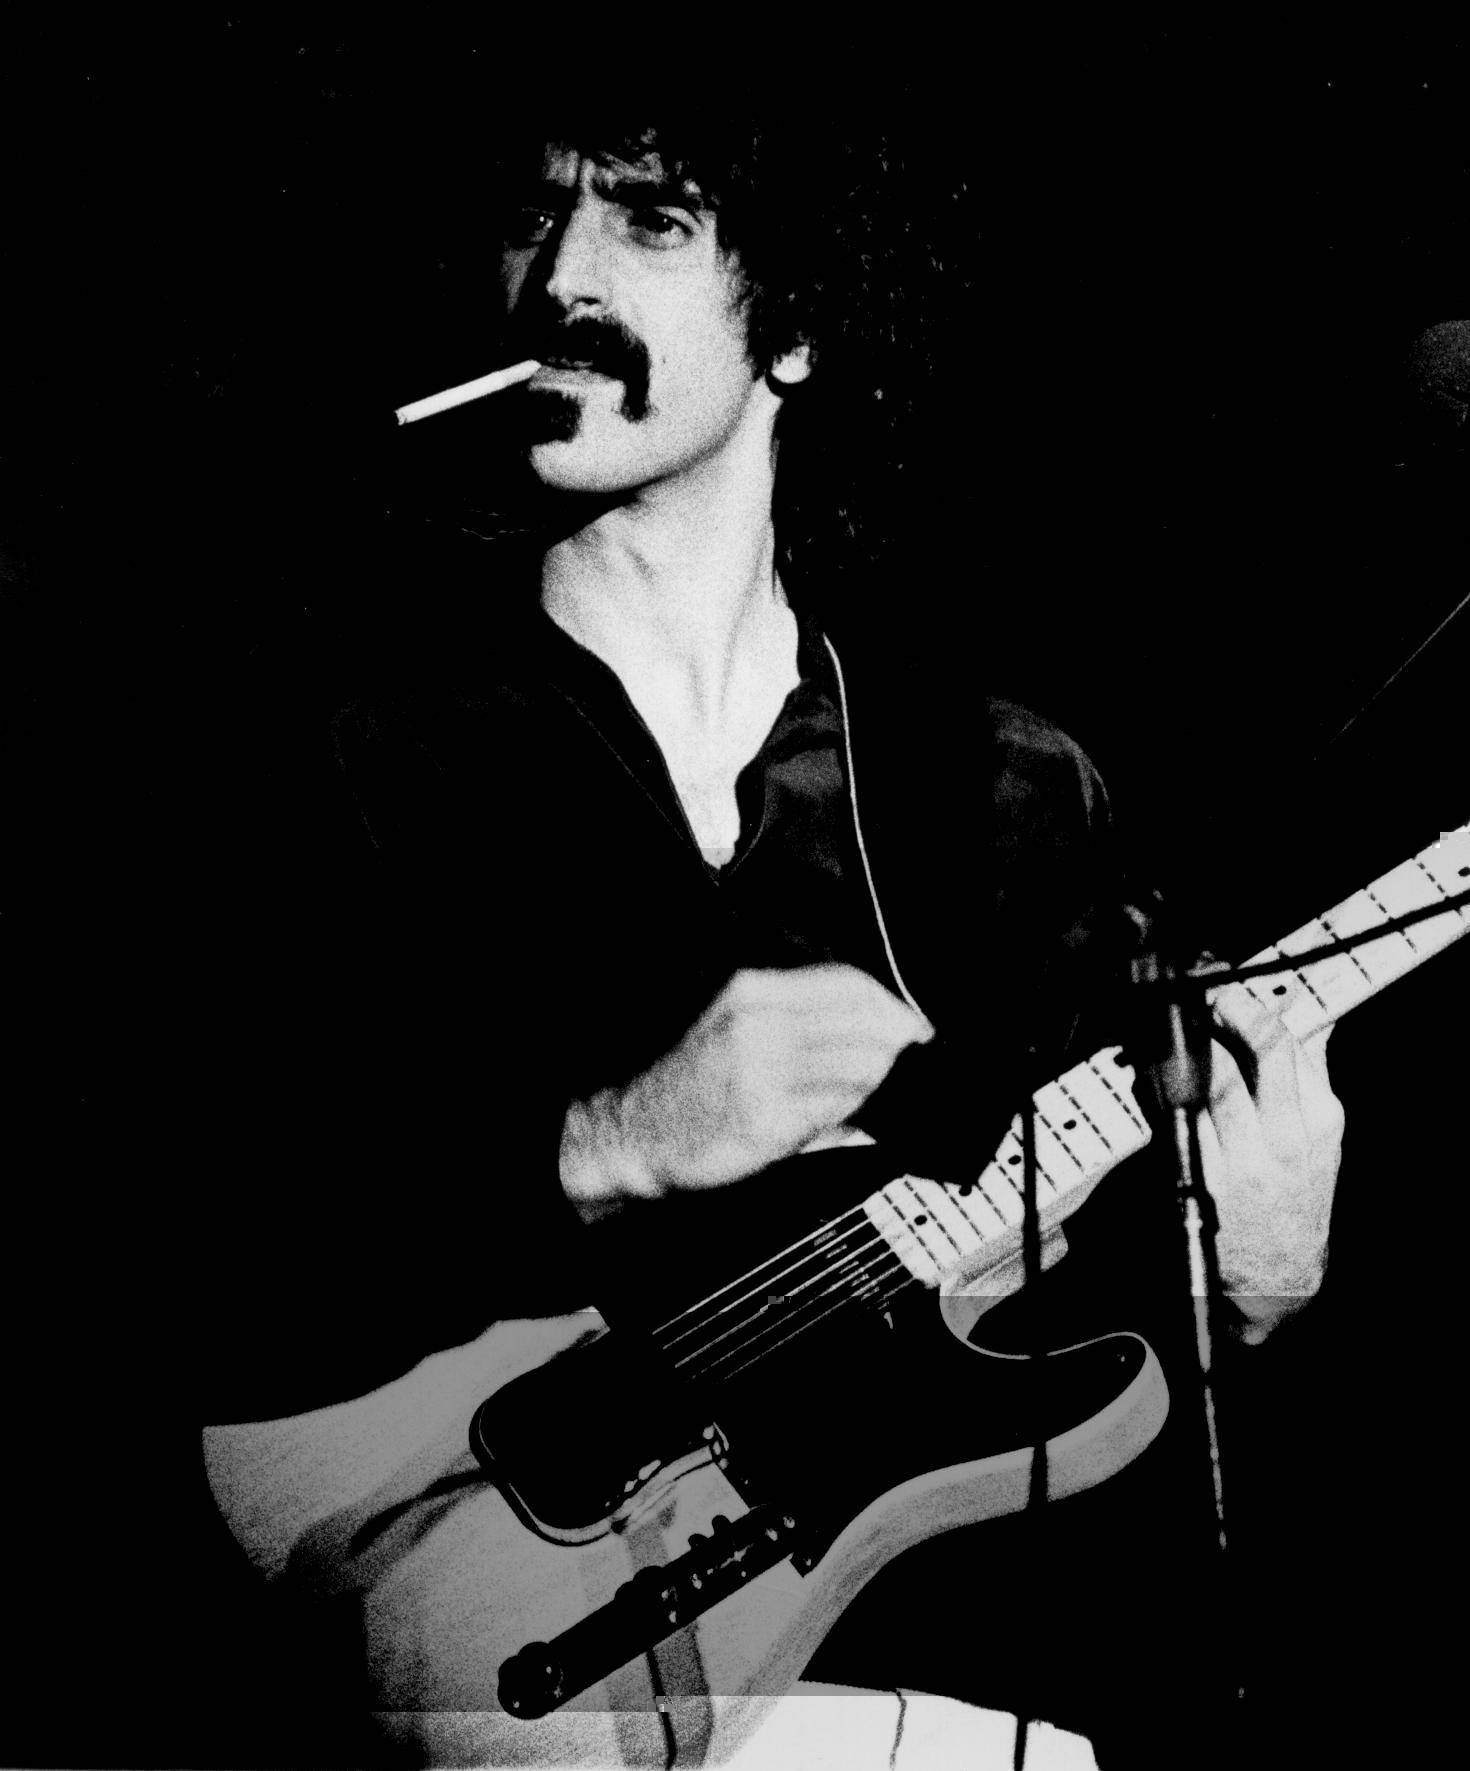 The Iconic Musician Frank Zappa Rocking On Stage Background